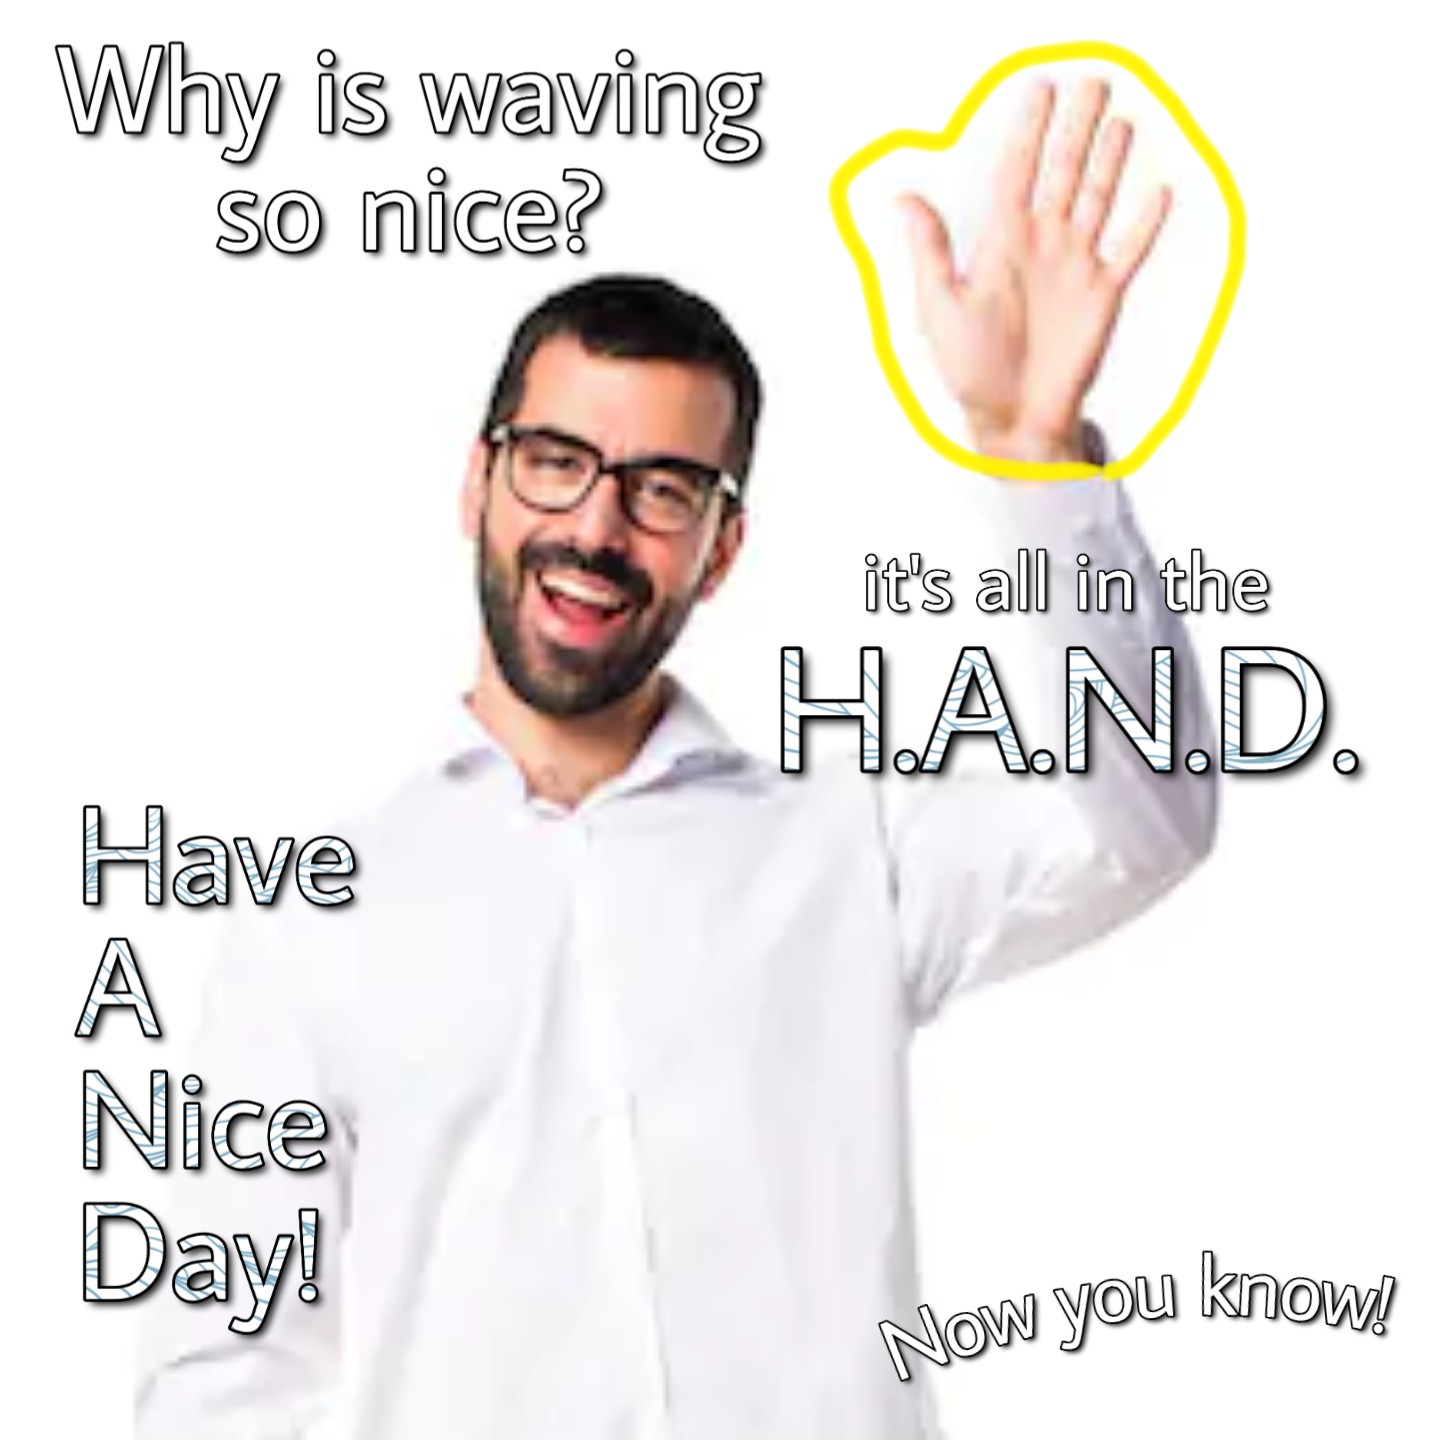 stock photos hello - Why is waving so nice? it's all in the Han.D. Have Nice Day! Now you know